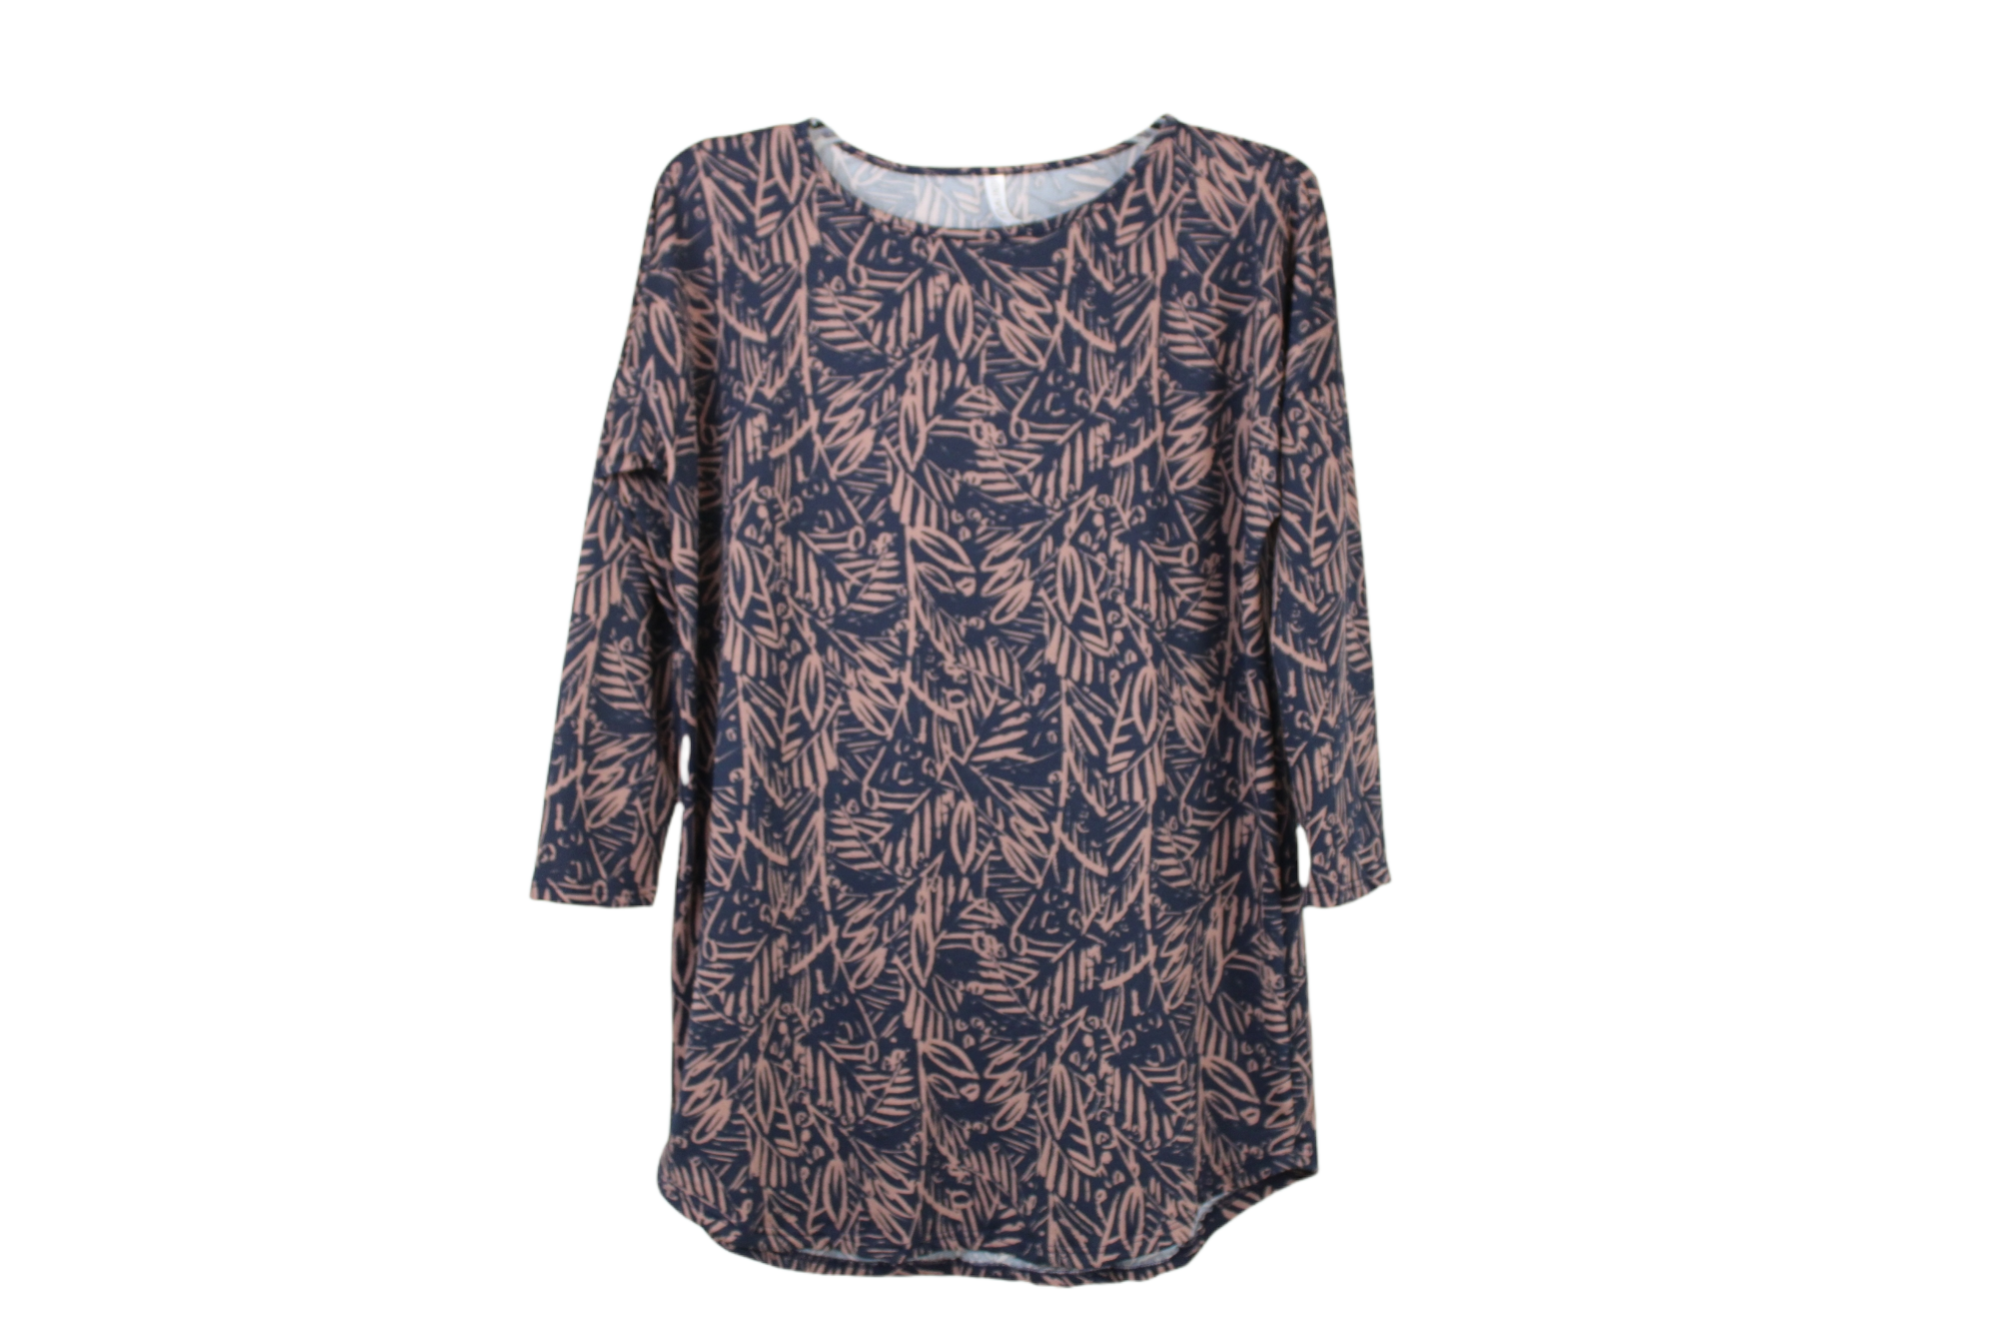 Honey & Lace Blue & Brown Patterned Top | L